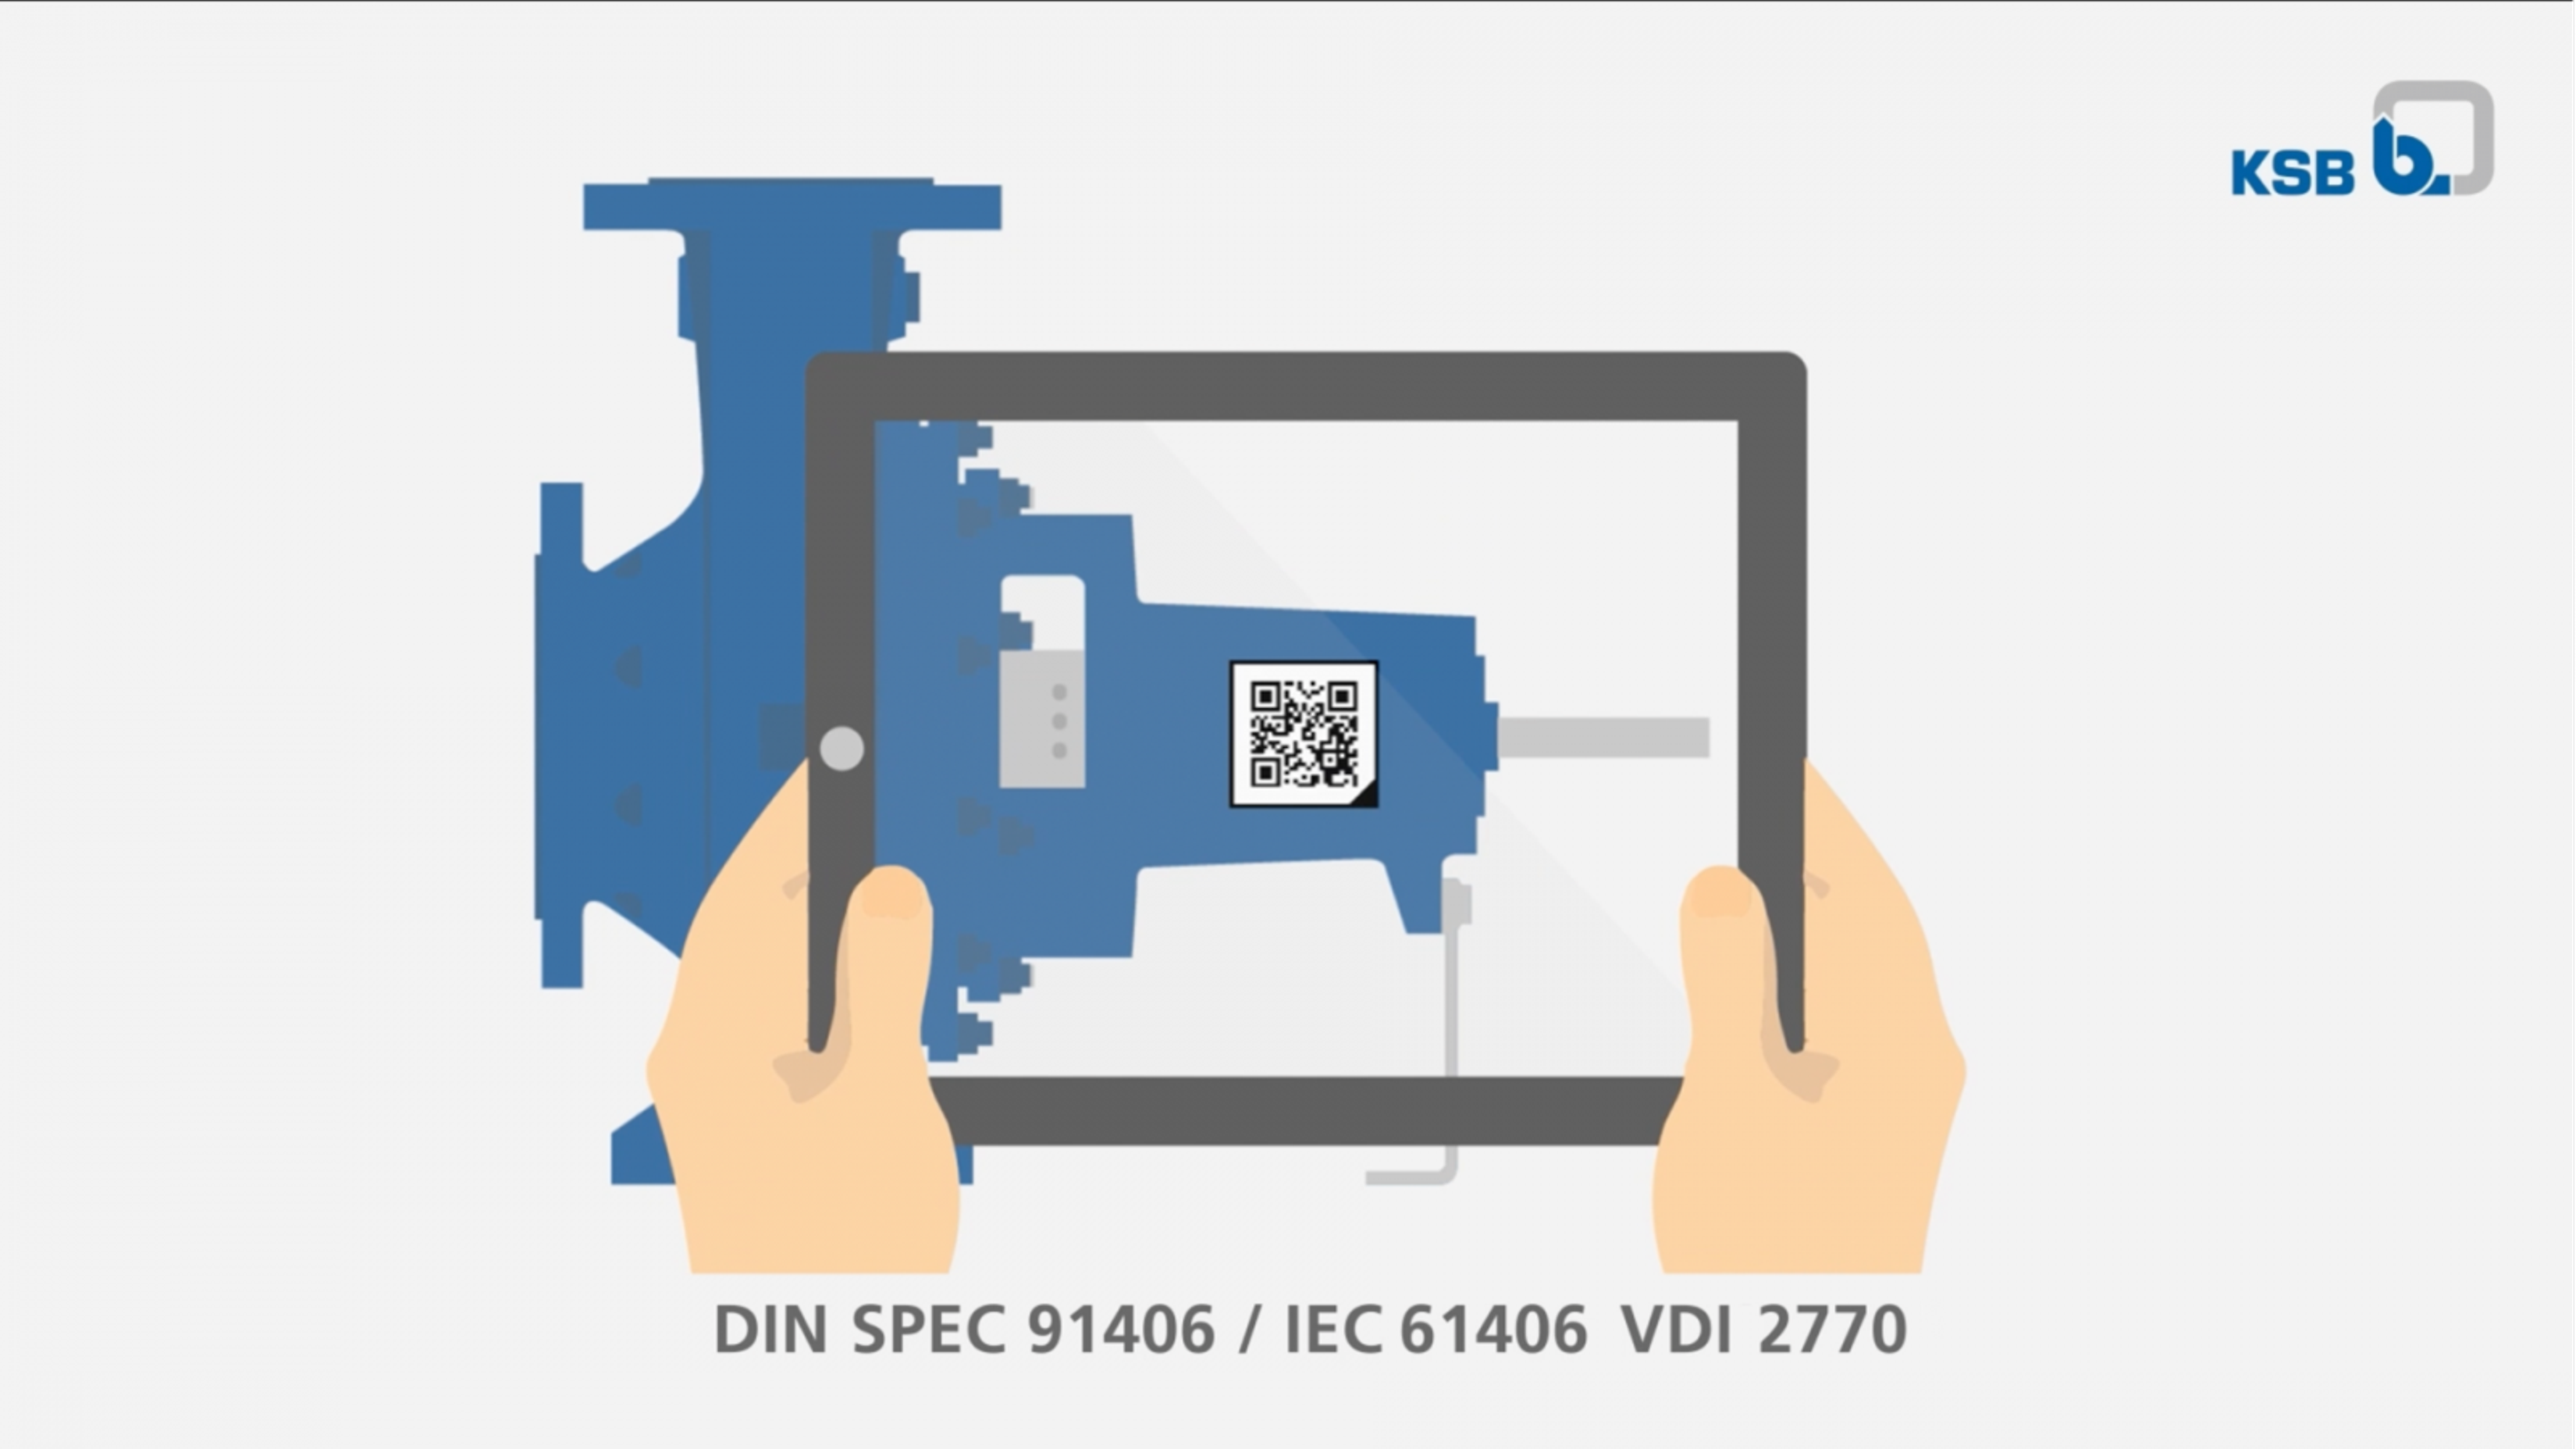 Cover image of the KSB video "IEC 61406 and VDI 2770 Requirements"